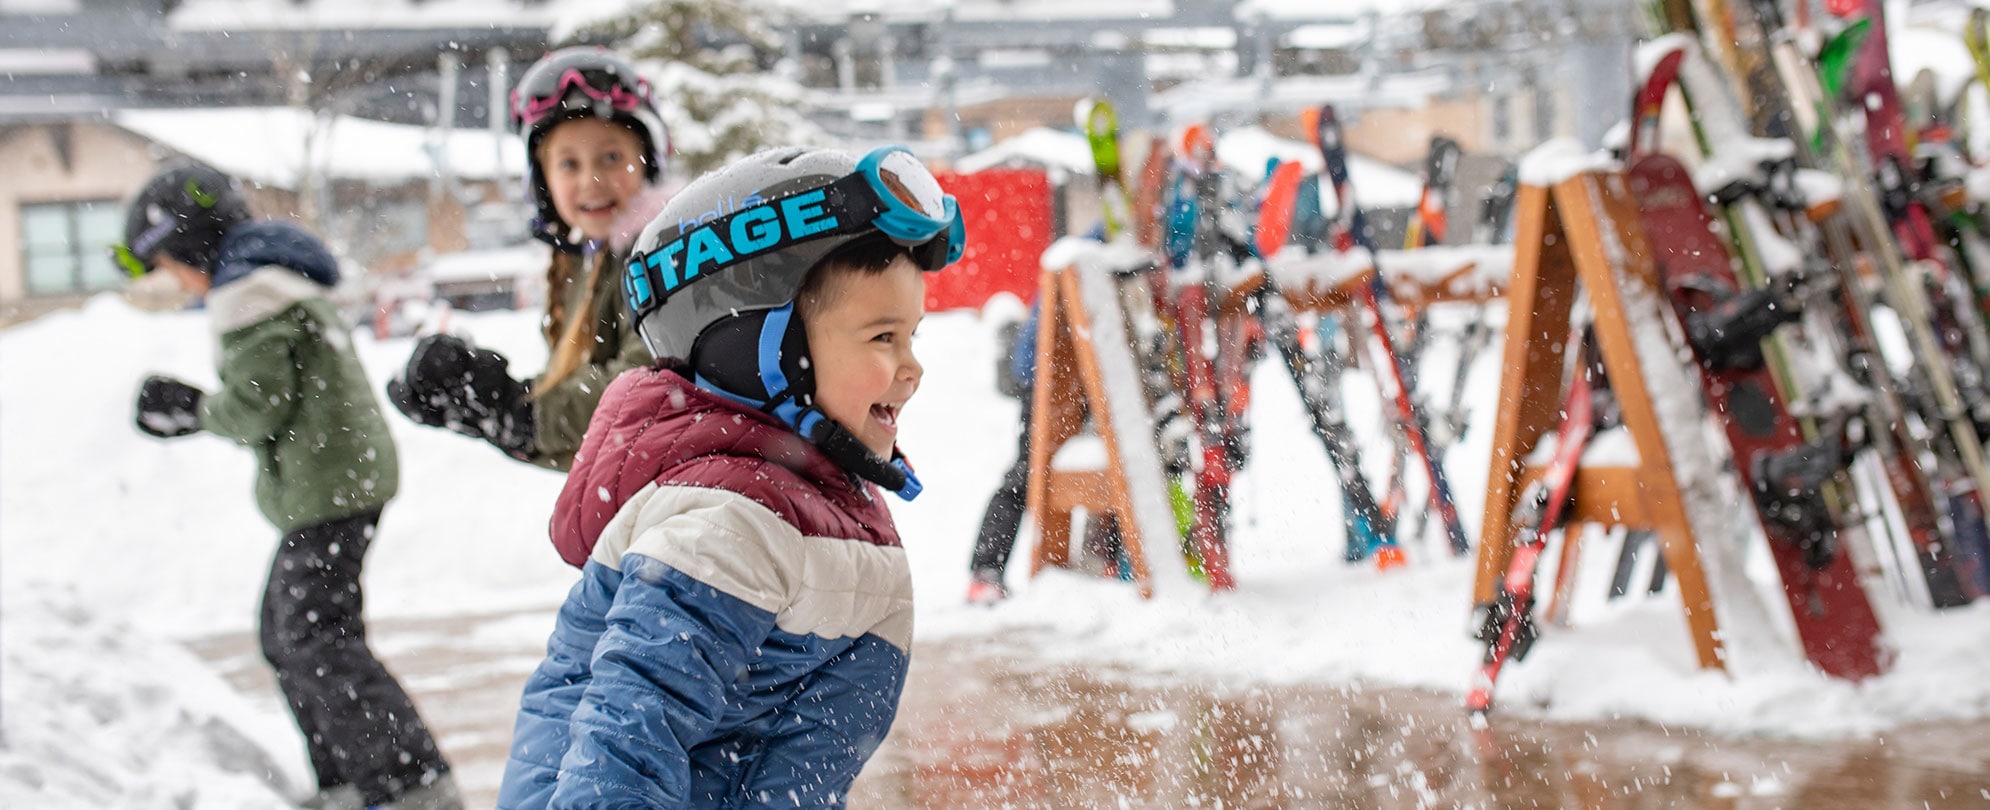 Three young kids wearing ski and winter gear smile and play in the falling snow.